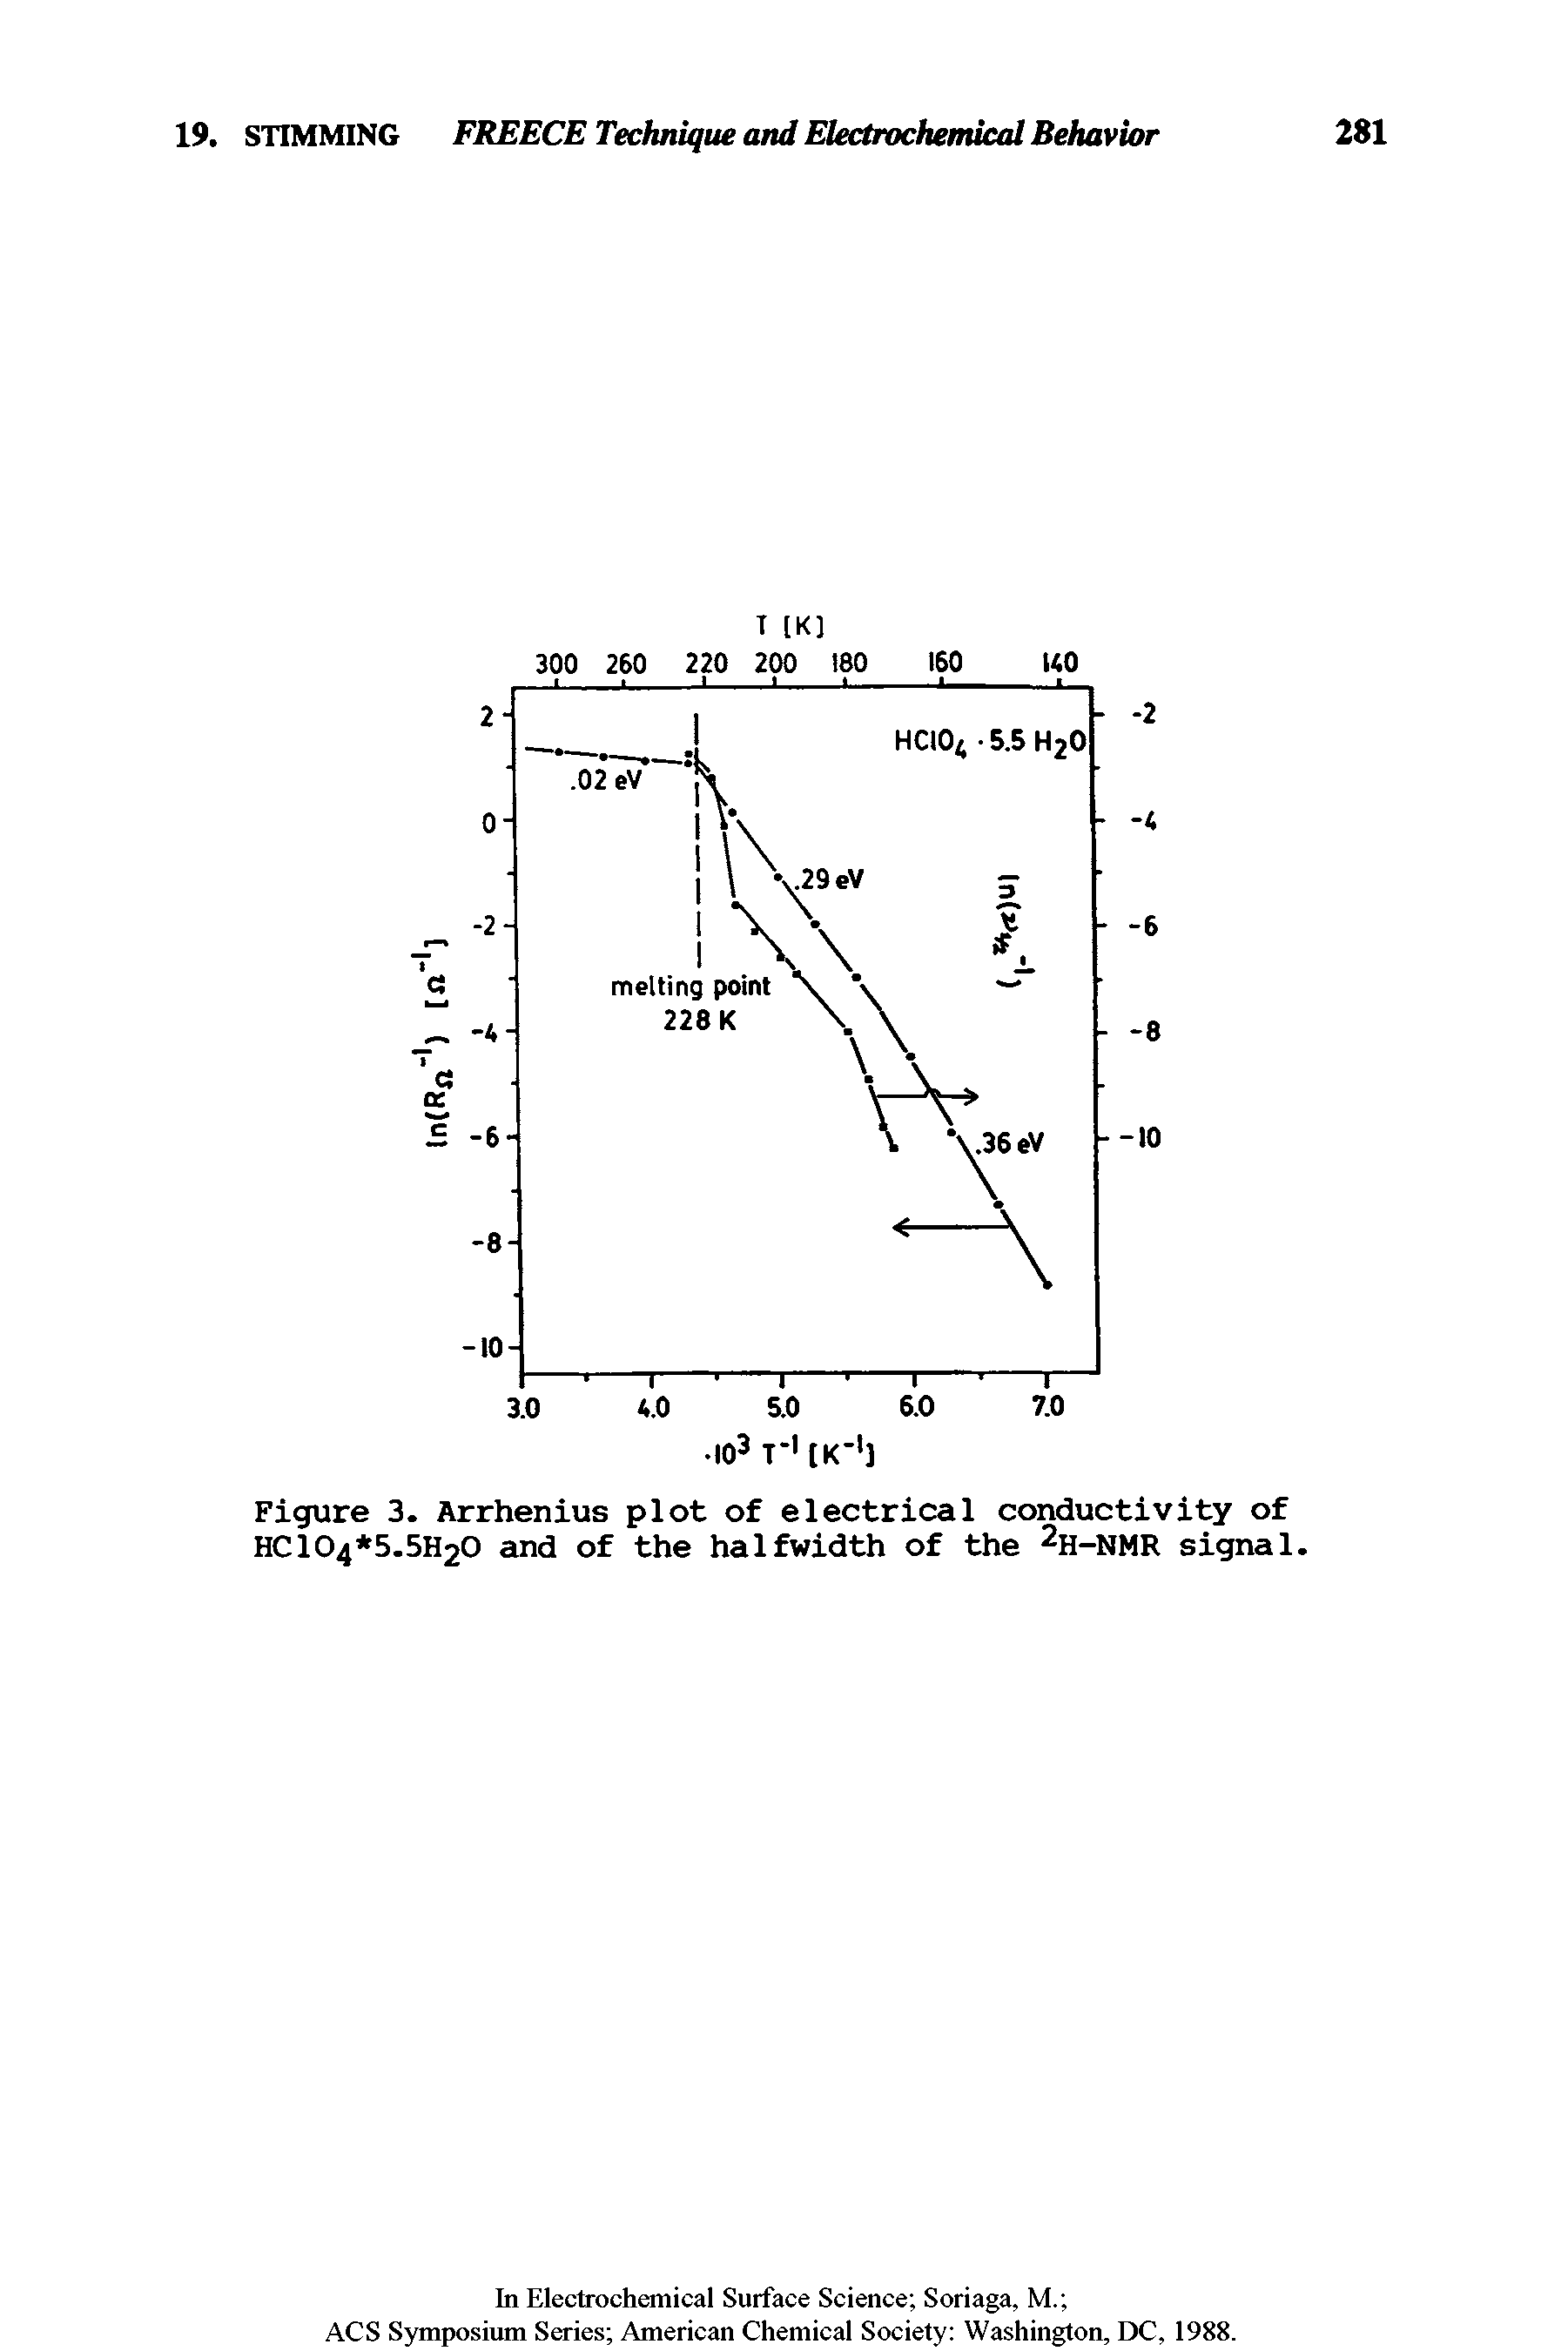 Figure 3. Arrhenius plot of electrical conductivity of HC104 5.5H20 and of the halfwidth of the 2H-NMR signal.